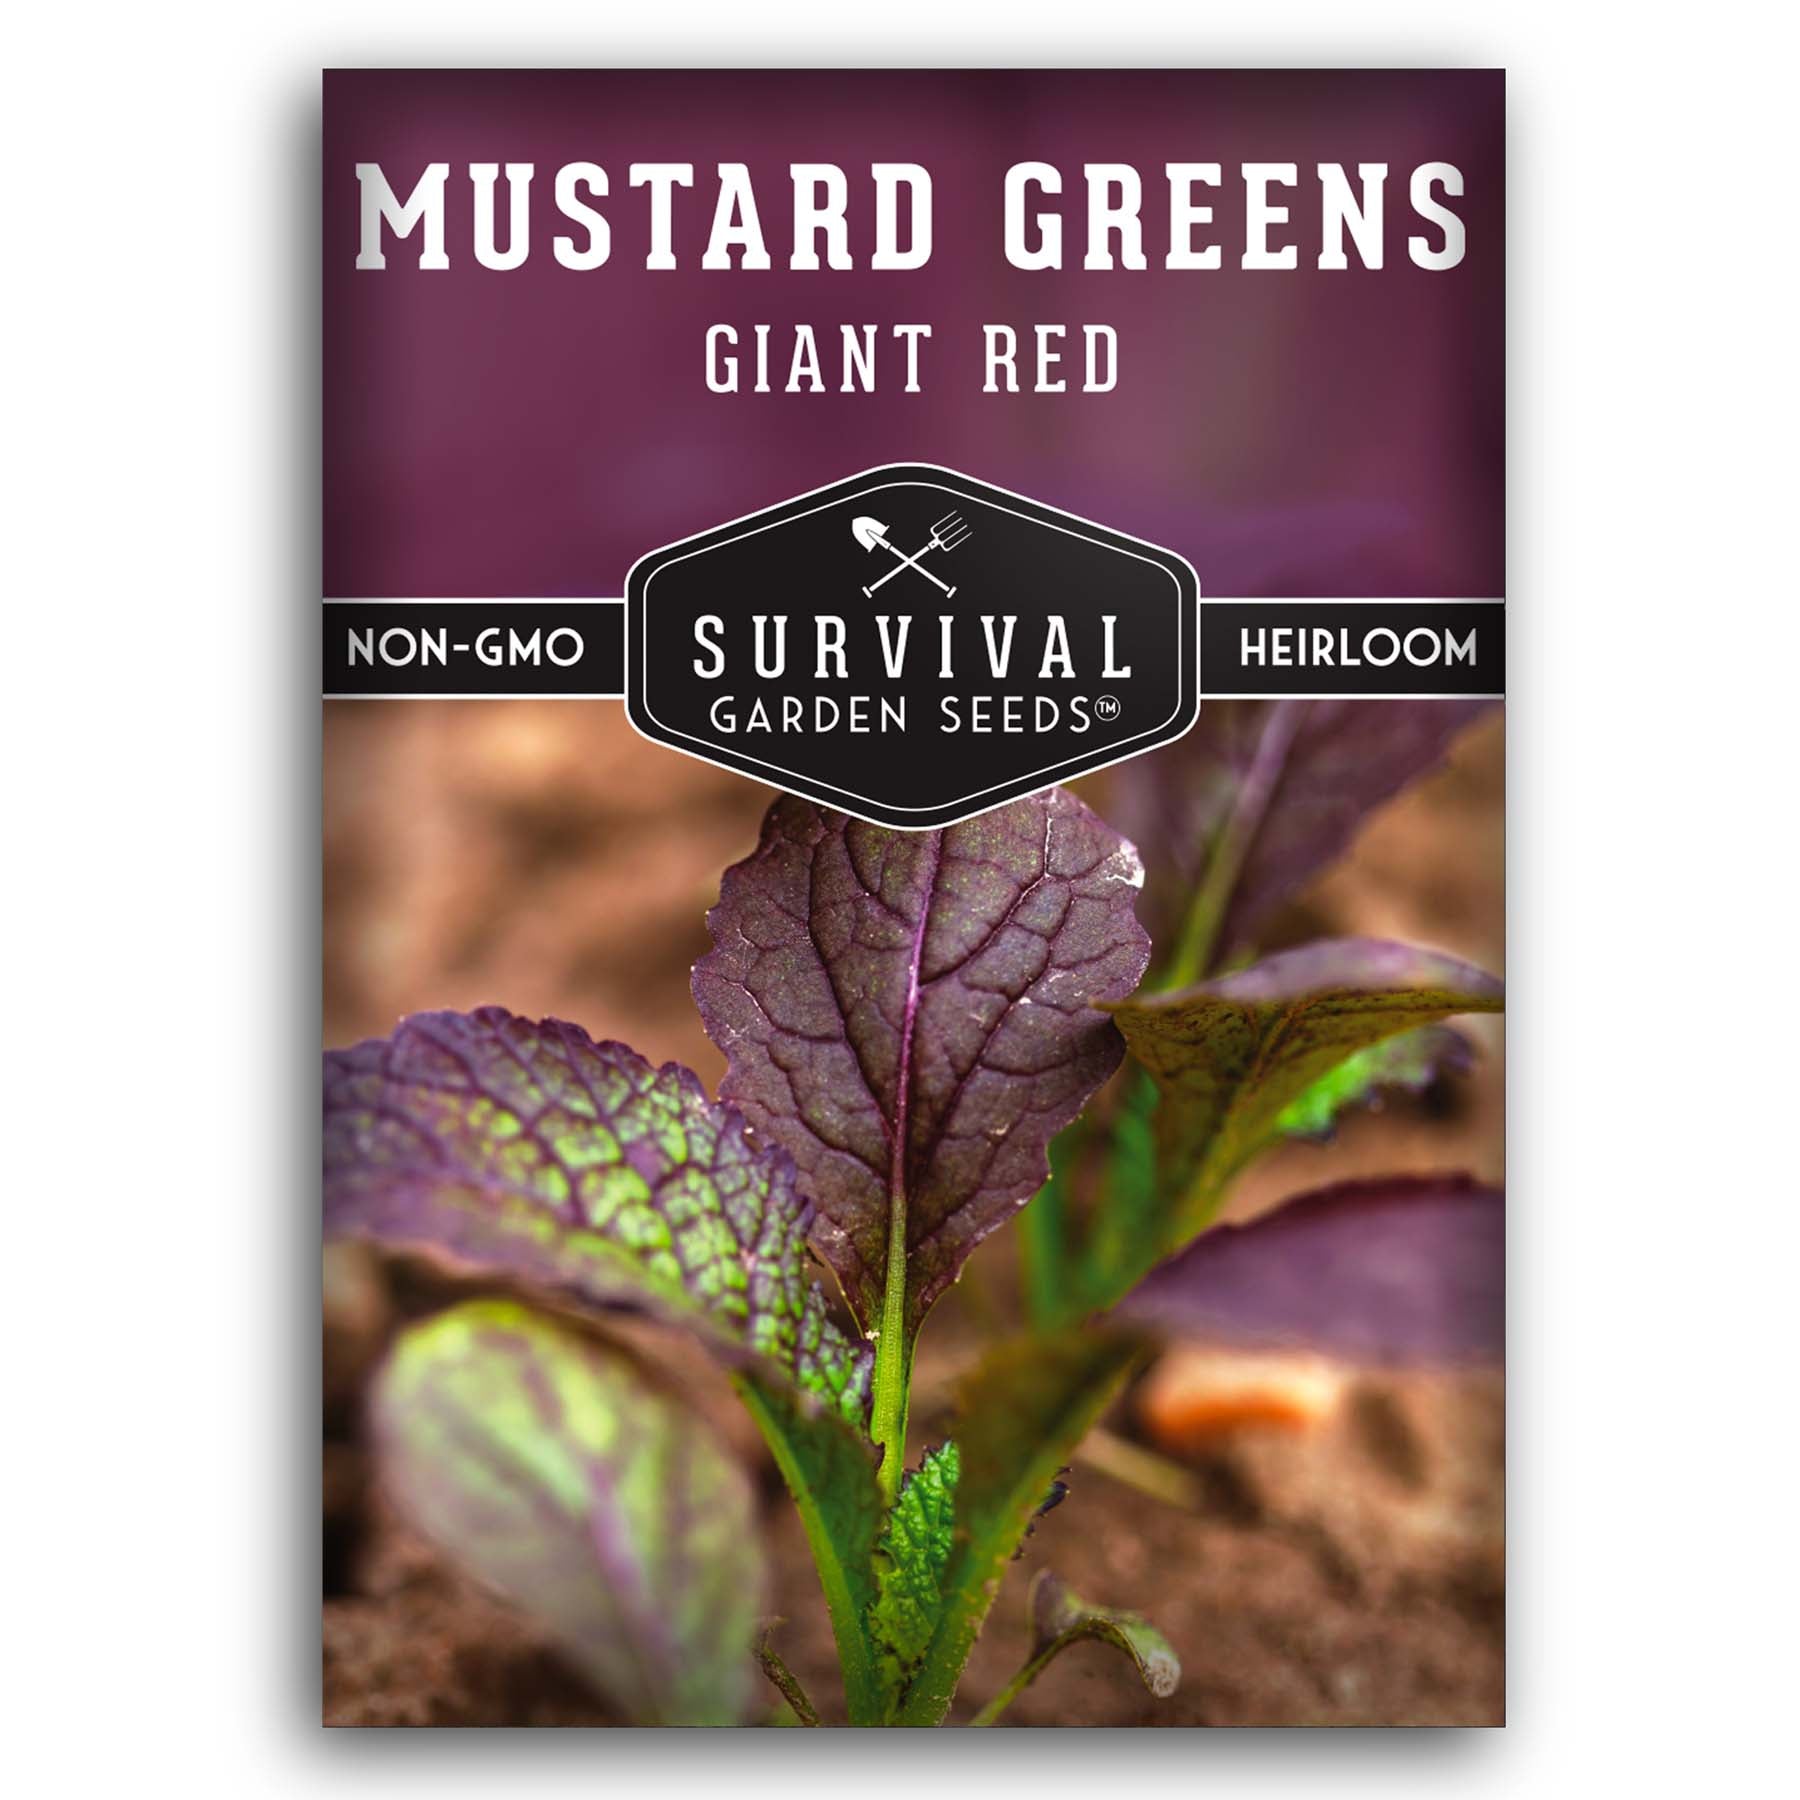 Giant Red Mustard Greens seeds for planting